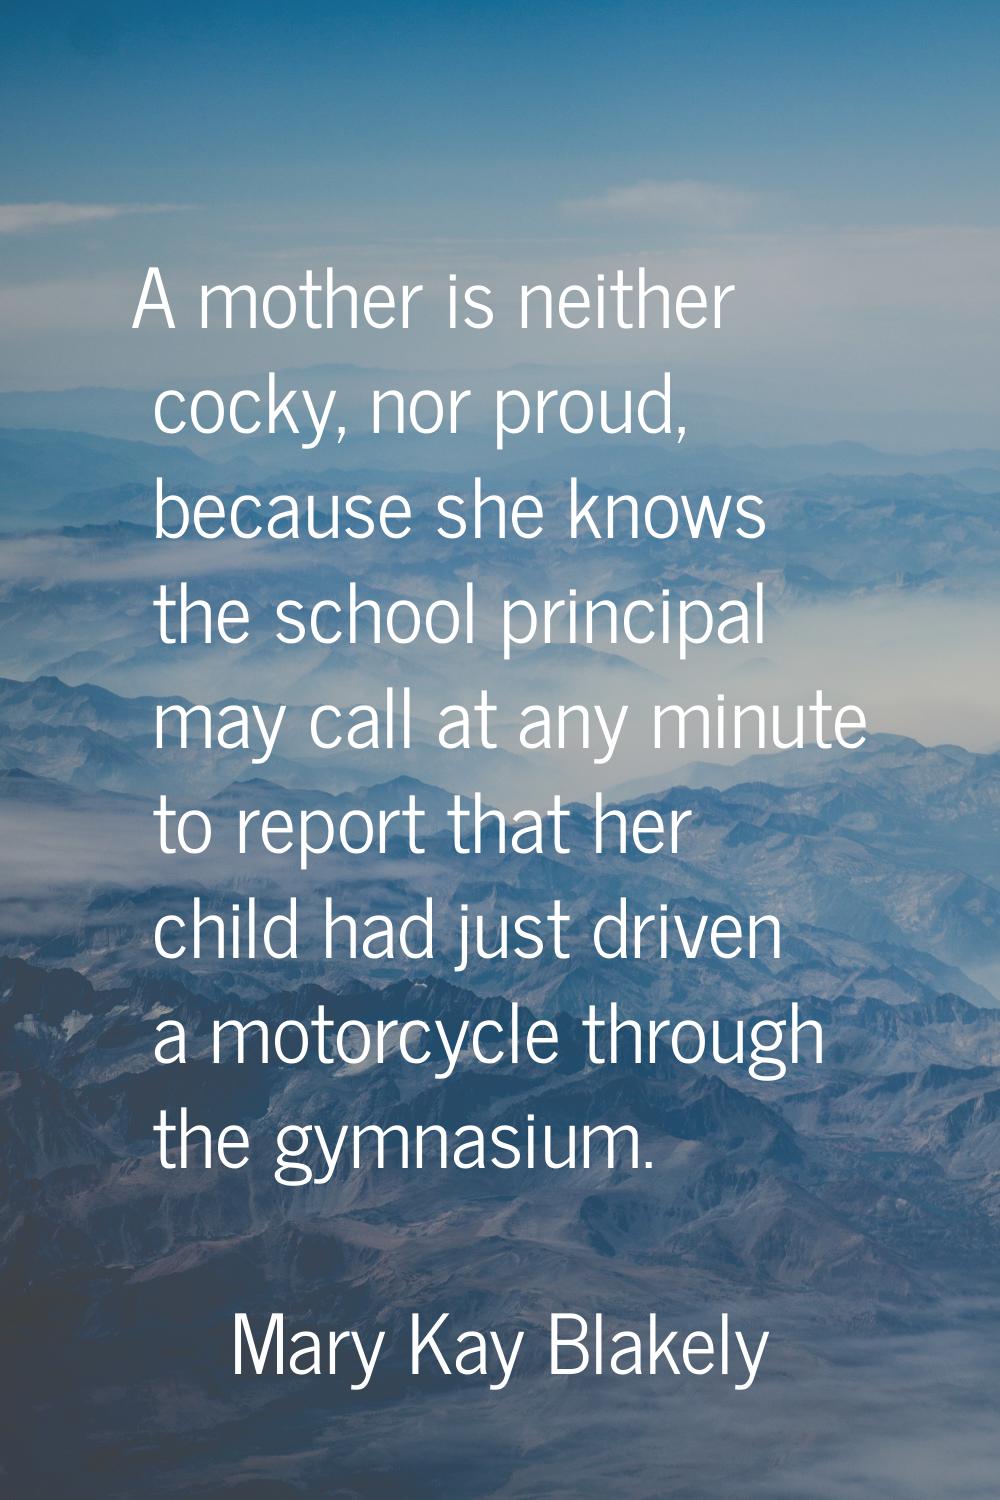 A mother is neither cocky, nor proud, because she knows the school principal may call at any minute